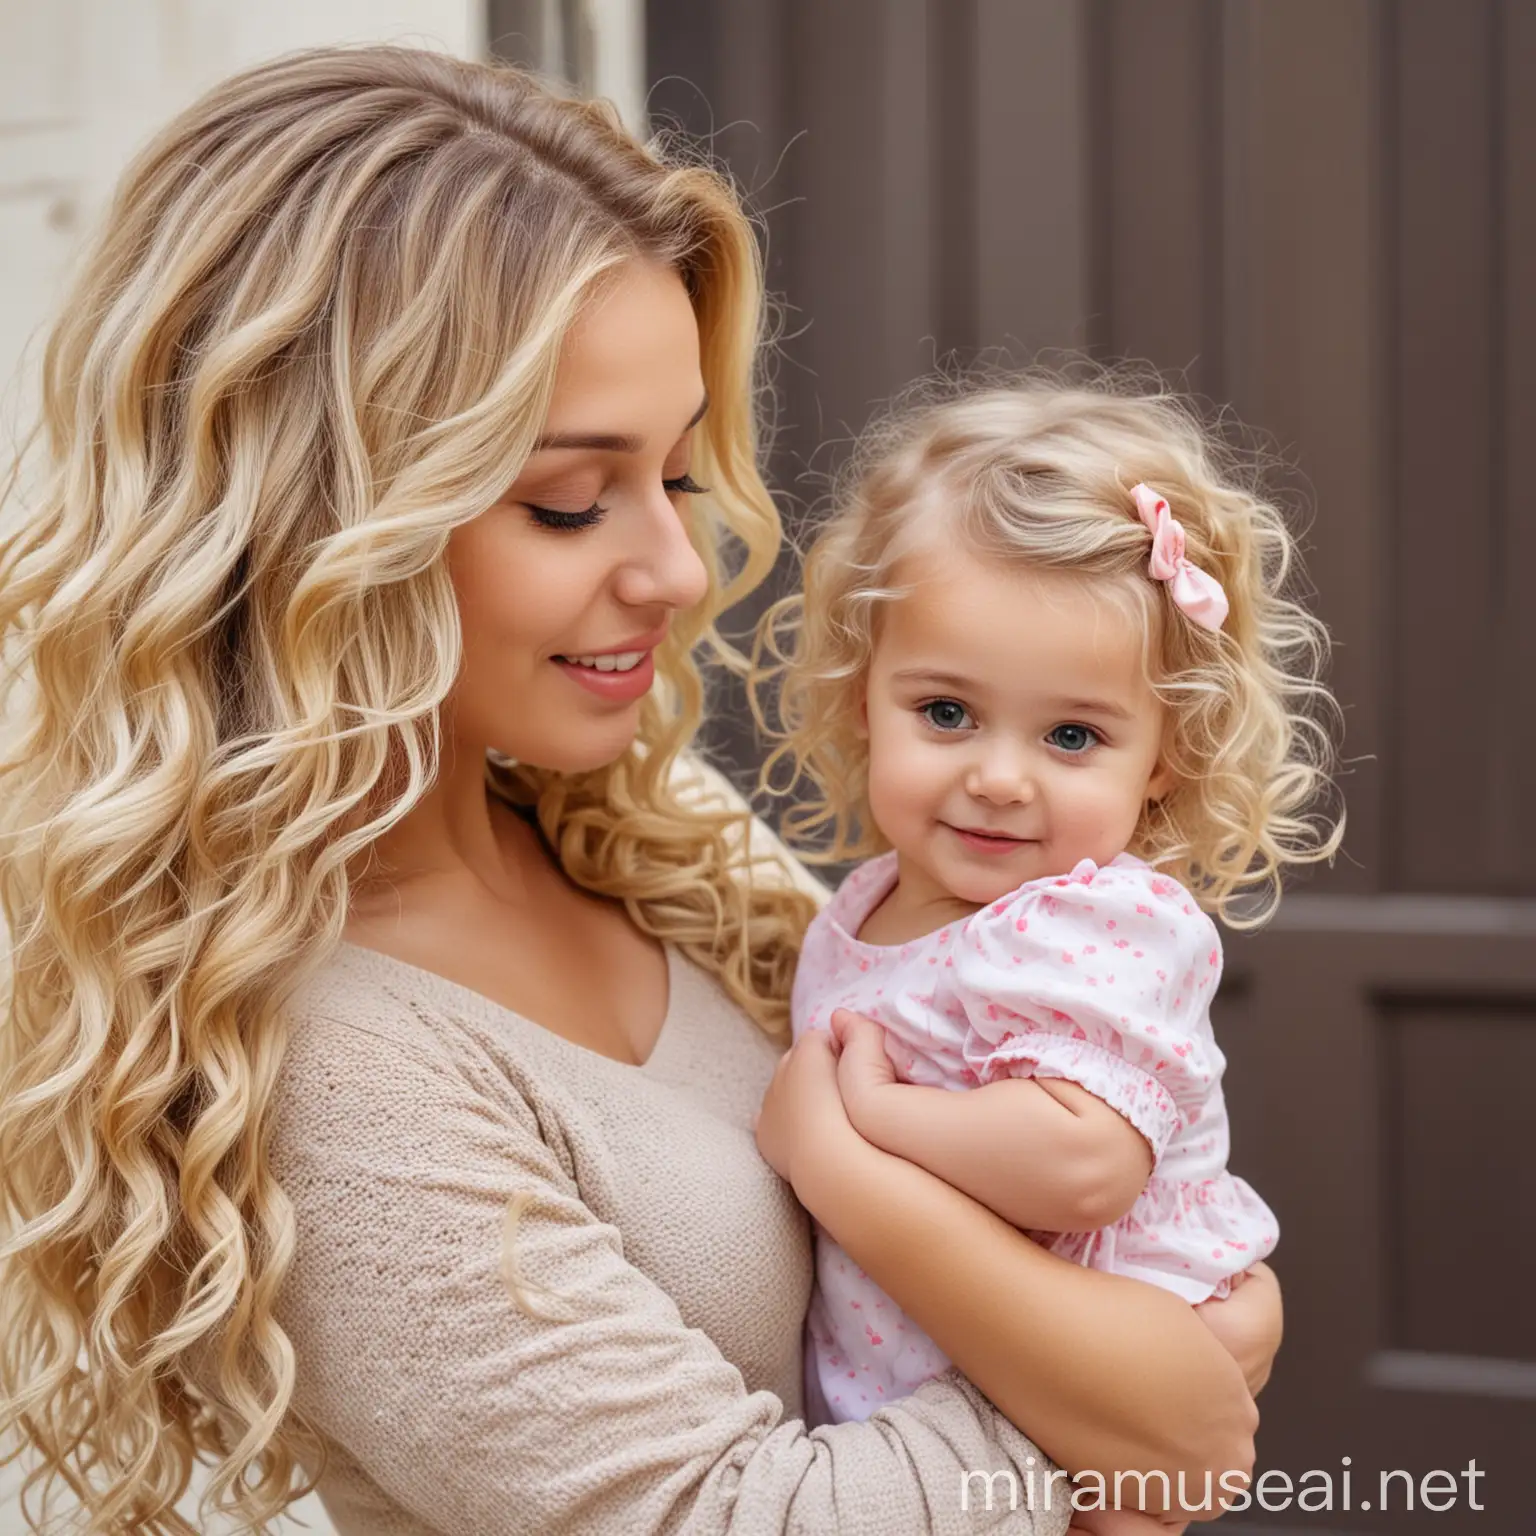 beautiful girl with blonde hair holding the hand of a little beautiful girl with dark long curly hair, house, mom and daughter